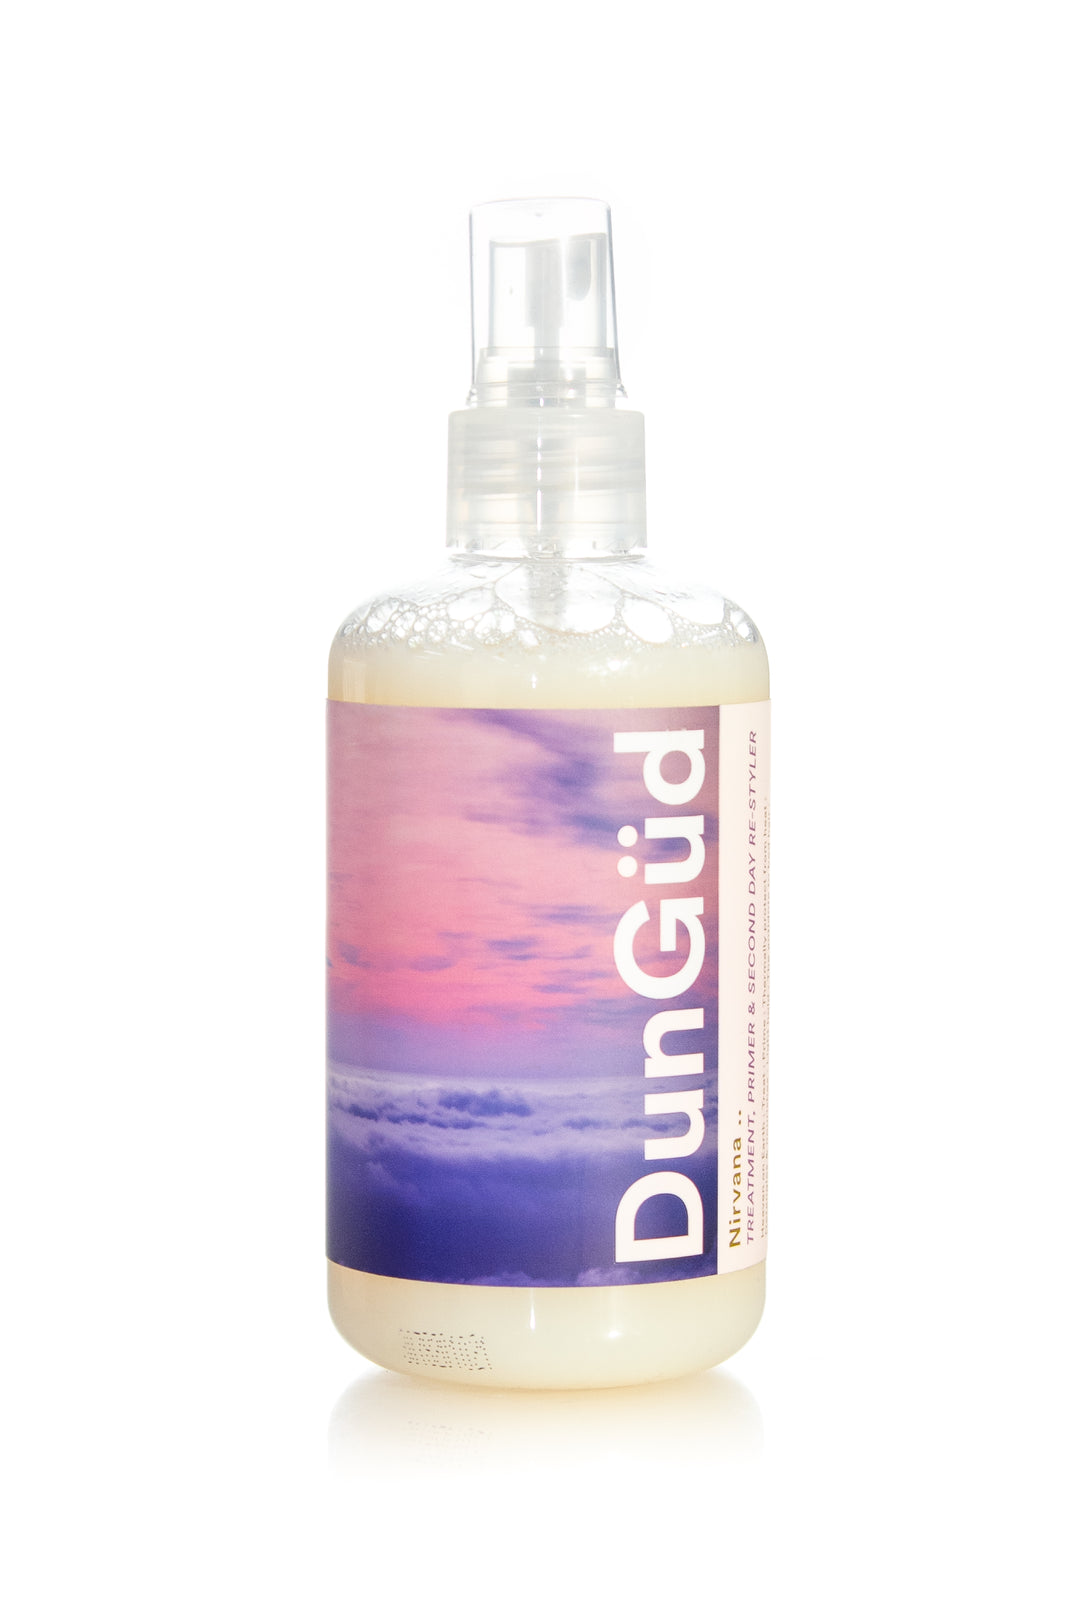 DUNGUD Nirvana Treatment, Primer & Second Day Re-Styler  | 250ml